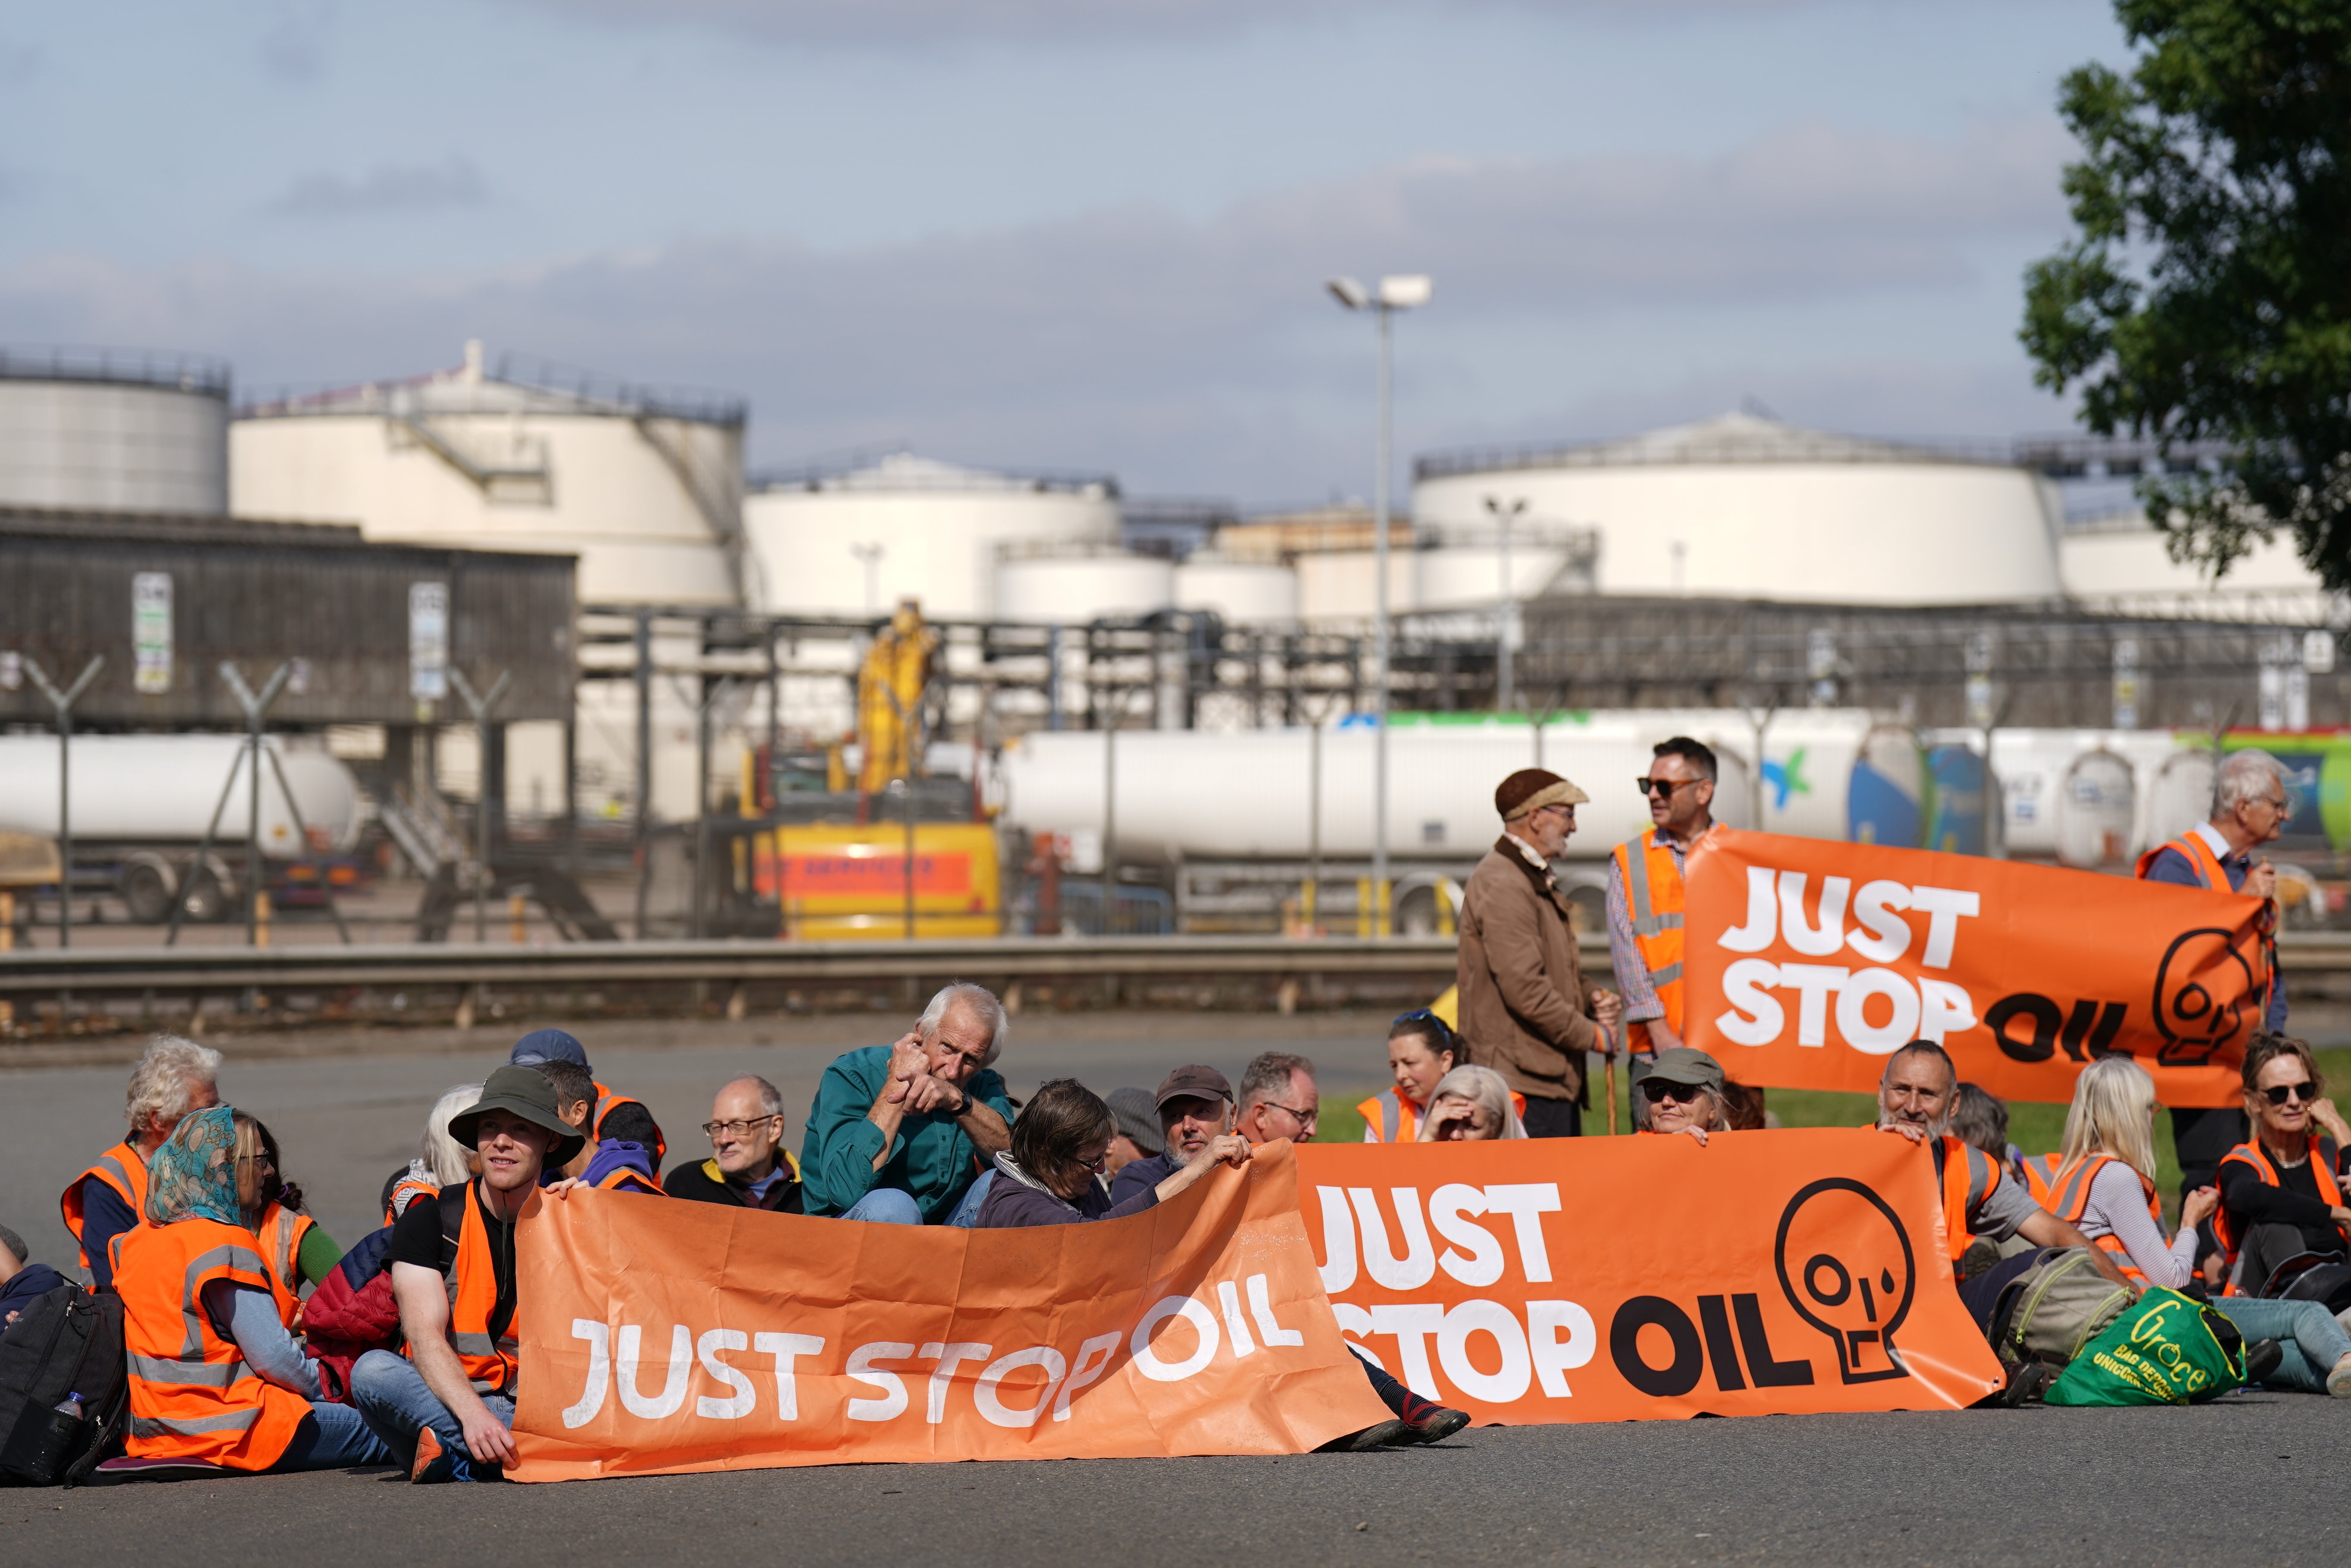 People take part in a Just Stop Oil protest blocking the entrance to the Kingsbury Oil Terminal near Birmingham (Joe Giddens/PA)